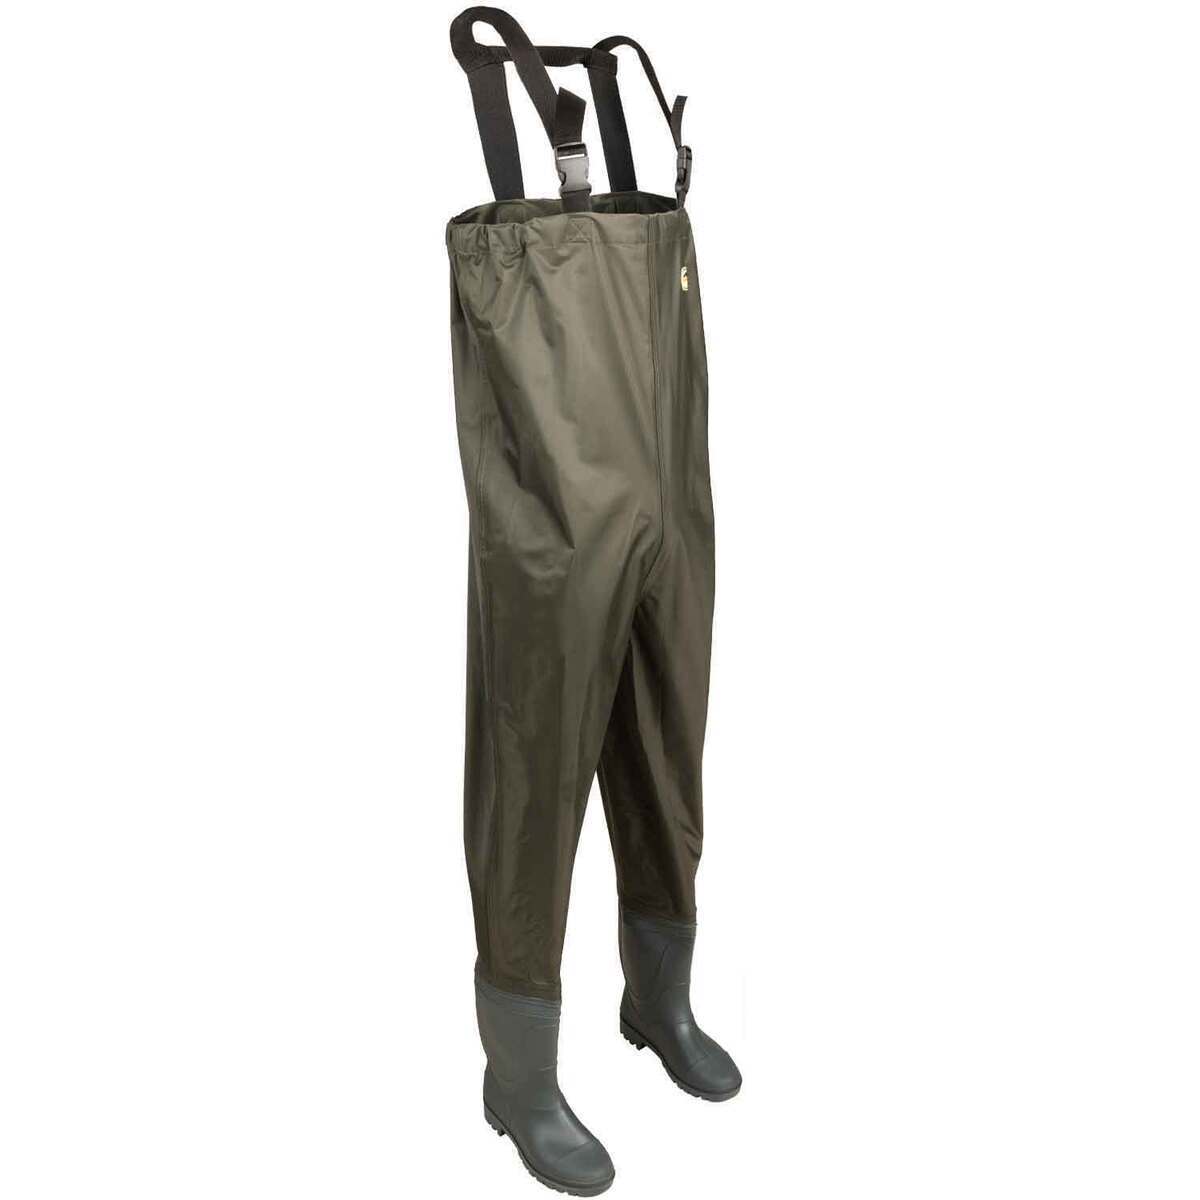 Fly Fishing Hero Chest Waders for Men with Boots Hunting Waders